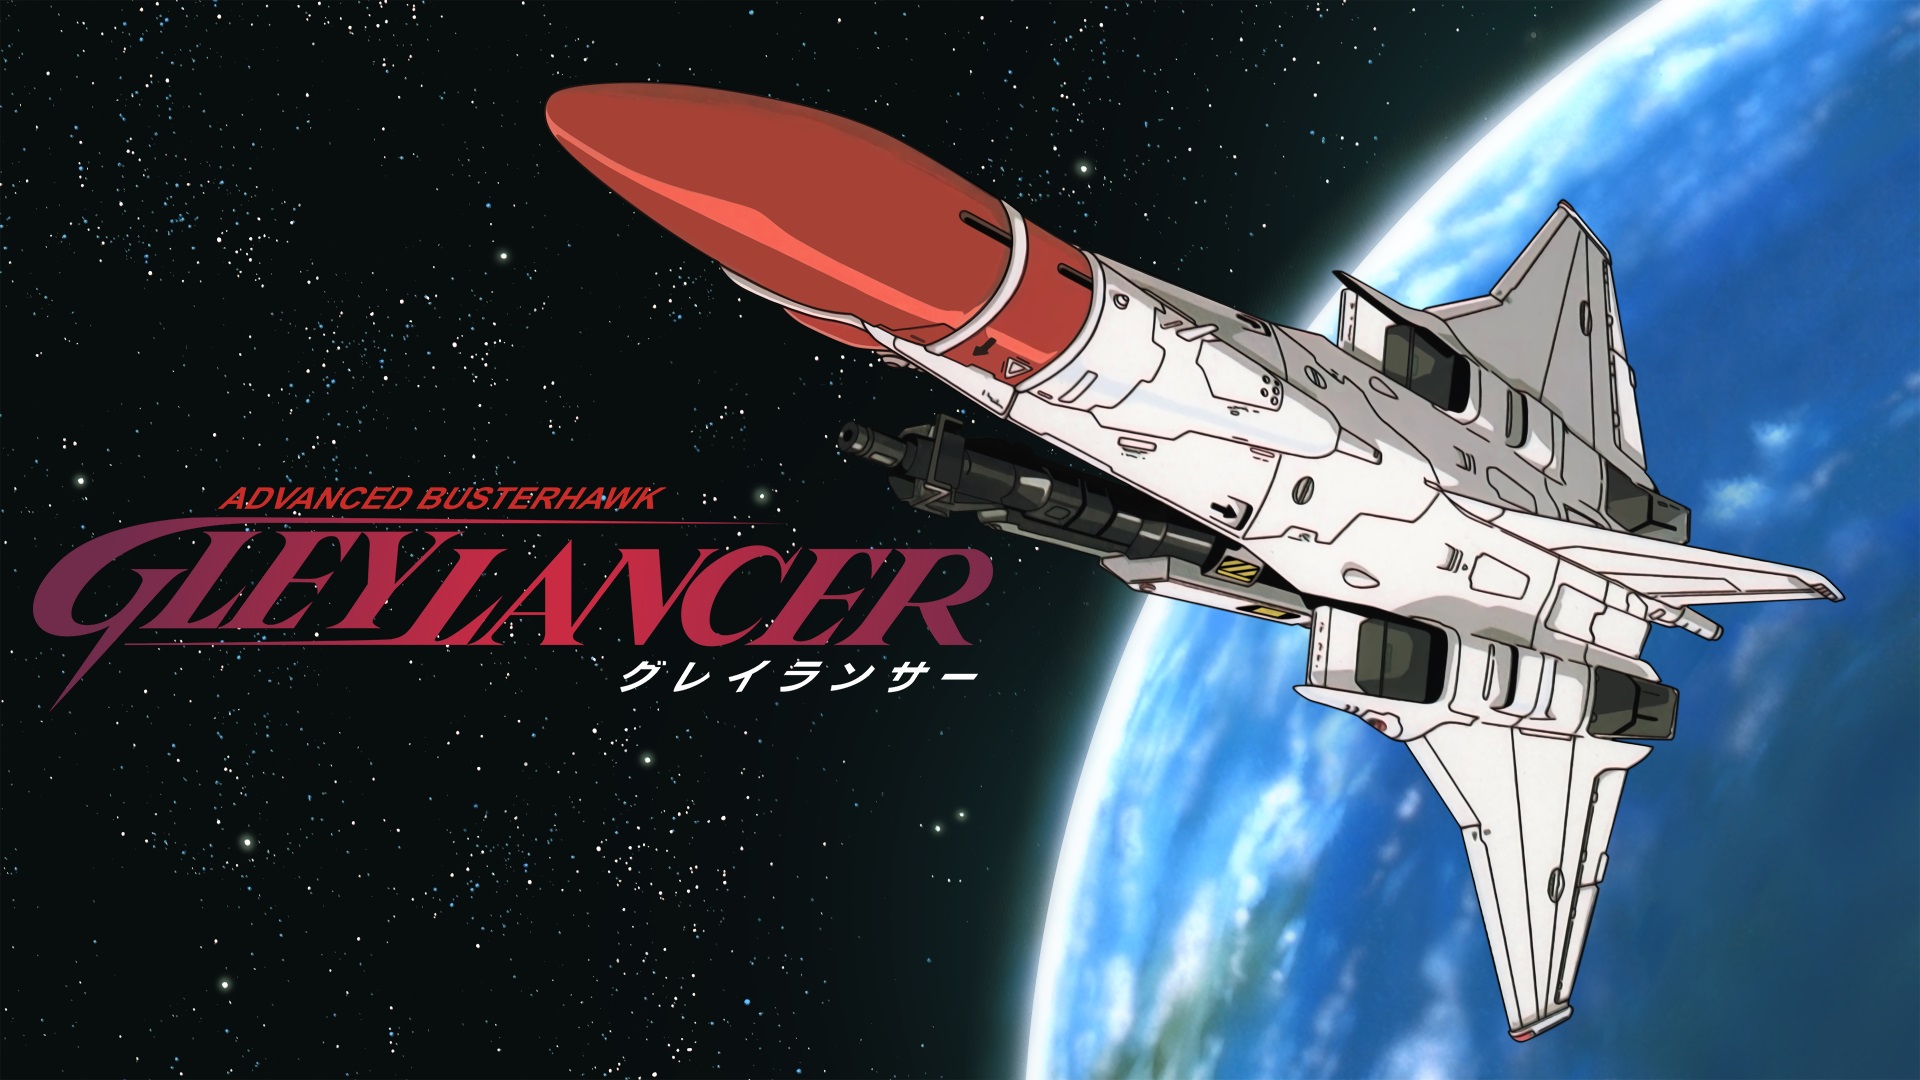 Gleylancer is Getting Re-Released